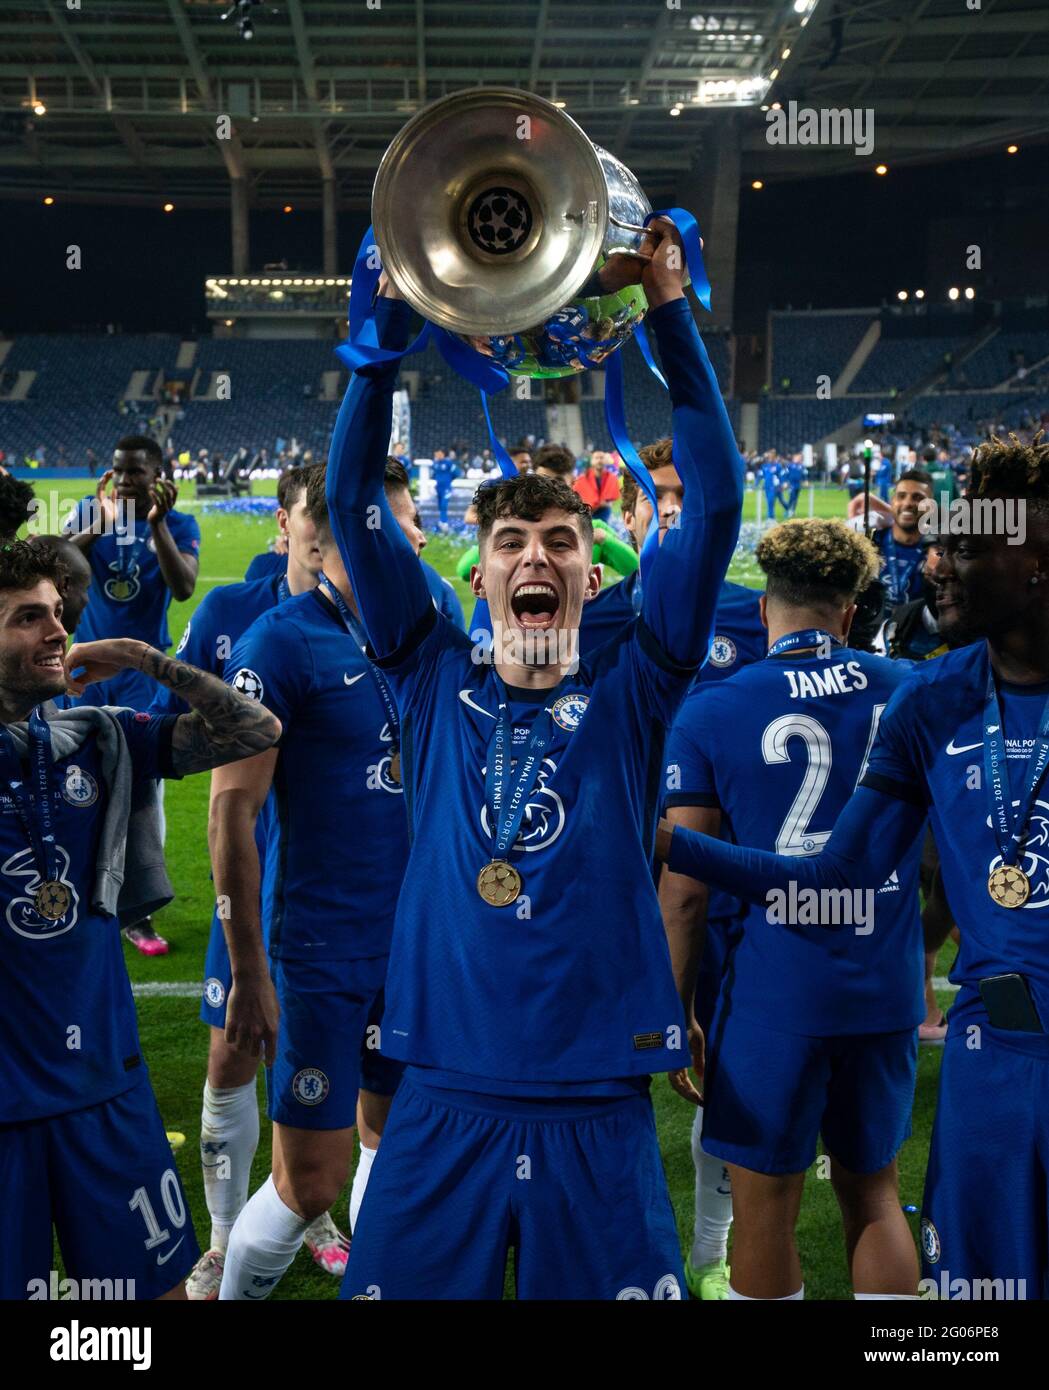 Ryal Quay Uk 29th May 21 Kai Havertz Of Chelsea Lifts The Winners Trophy Following The Uefa Champions League Final Match Between Manchester City And Chelsea At The Est Dio Do Drag O Porto